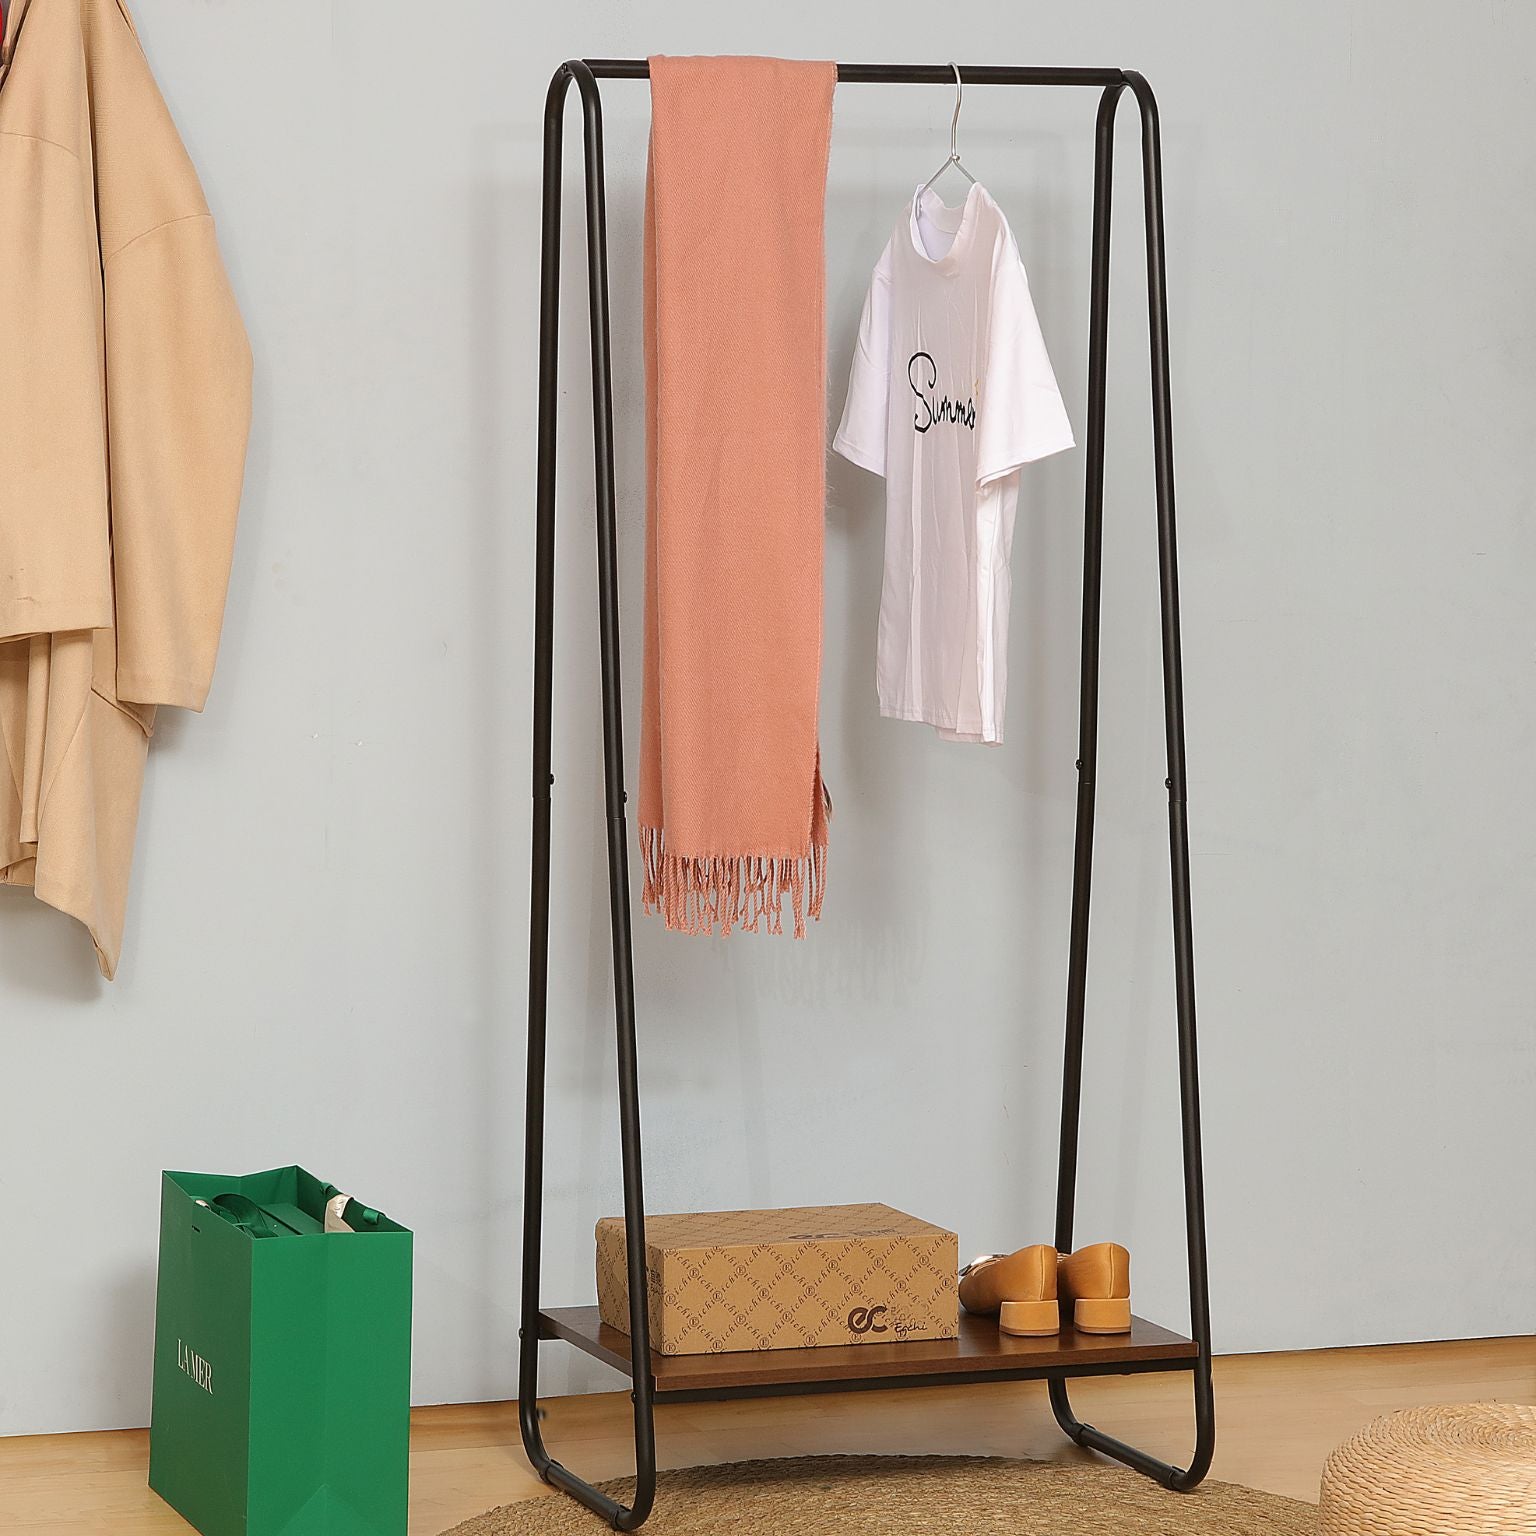 clothes hanging rack and bottom shelf